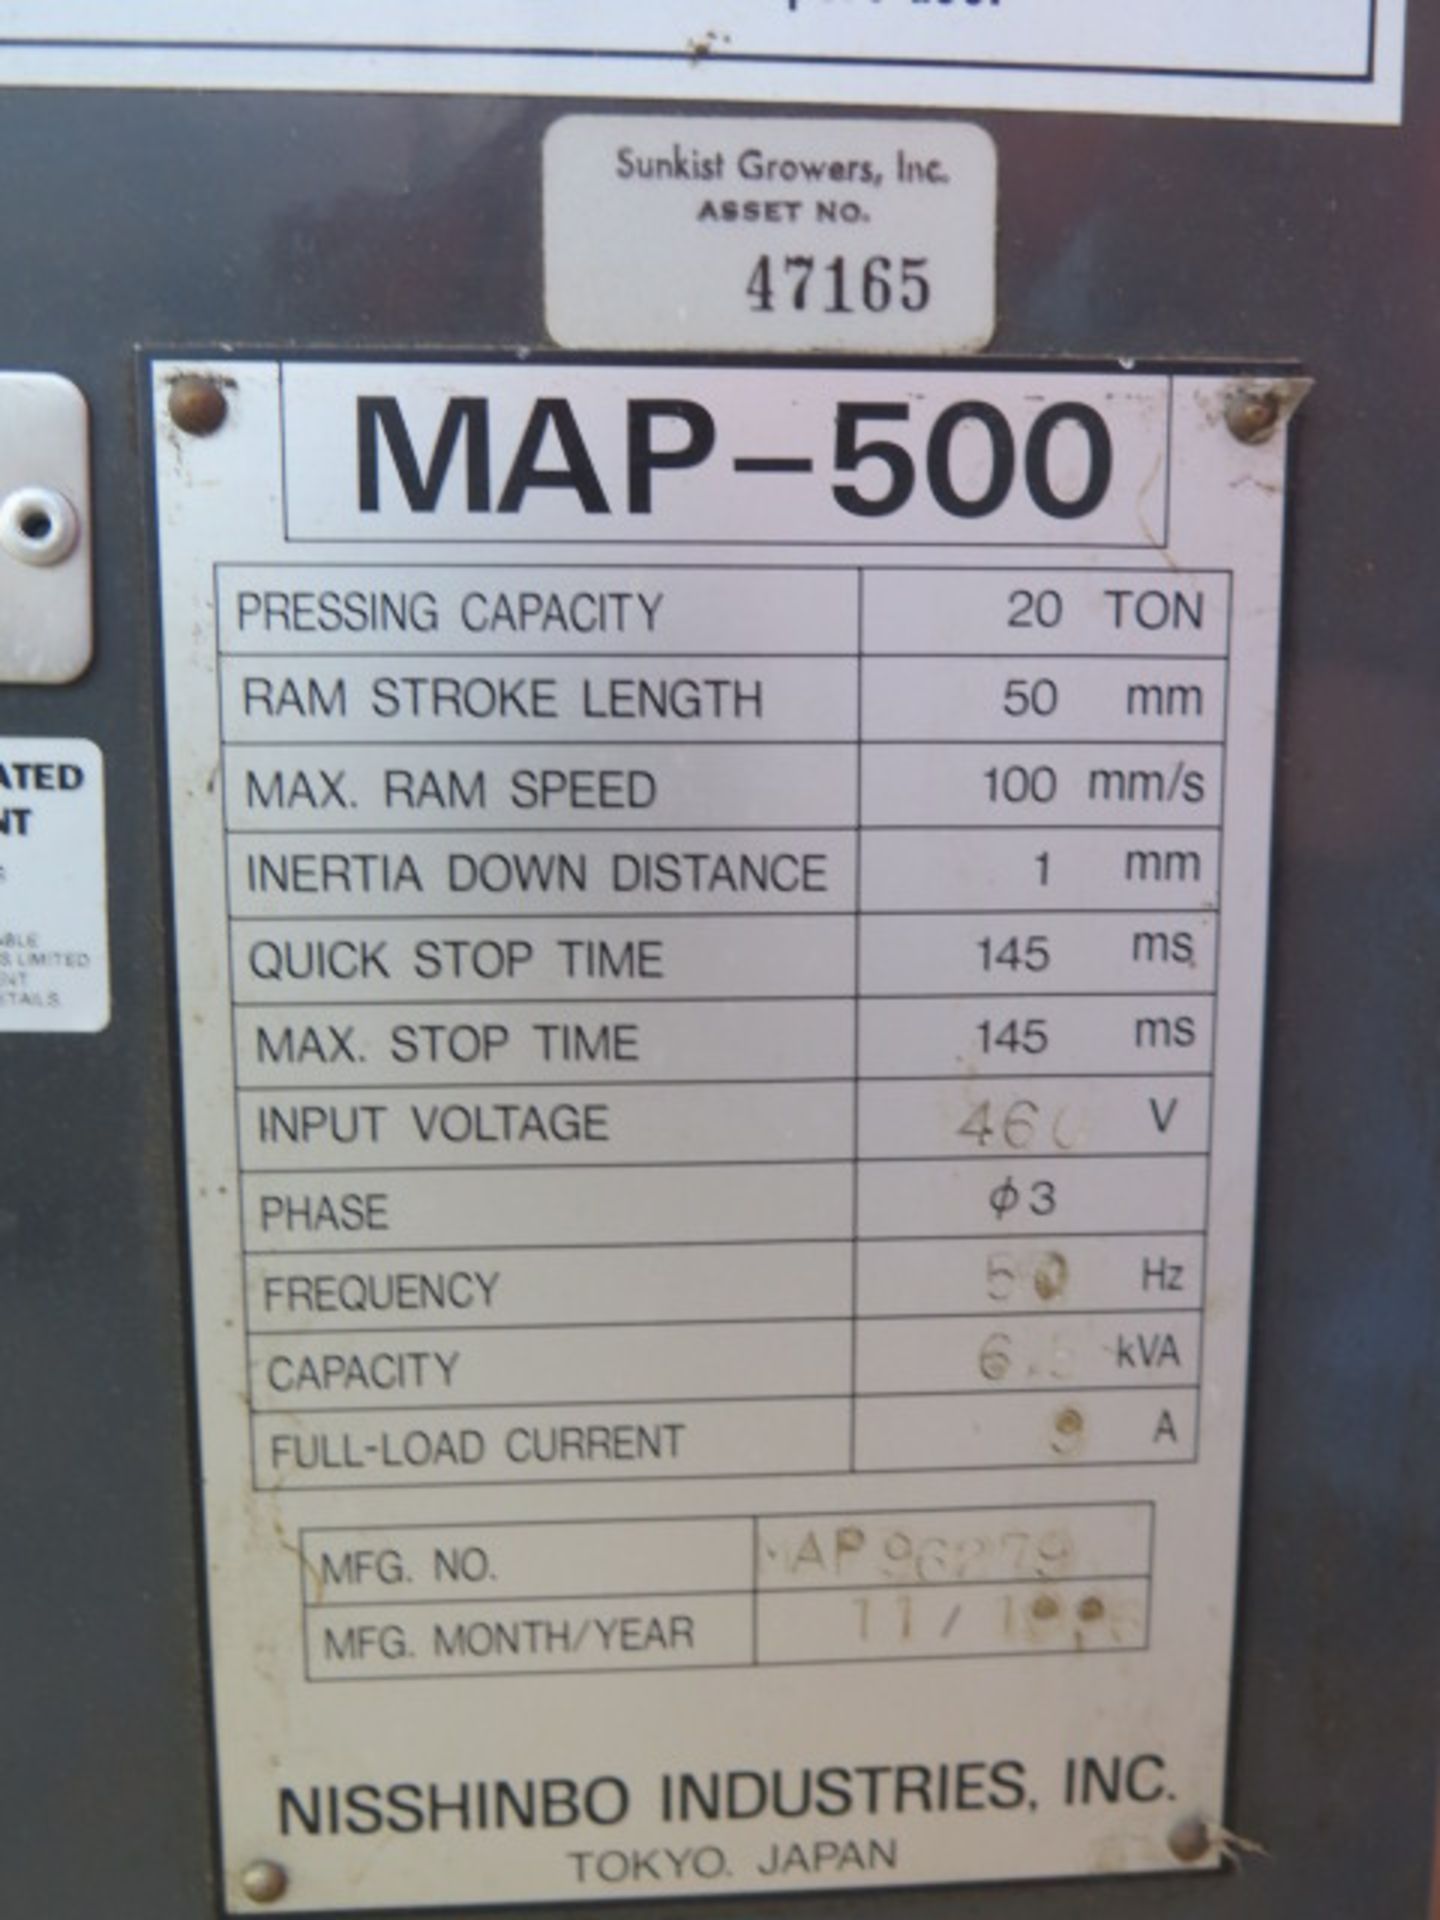 1996 Nisshimbo MAP-500 20 Ton 10-Station CNC Turret Punch Press s/n MAP96279. SOLD AS IS - Image 12 of 12